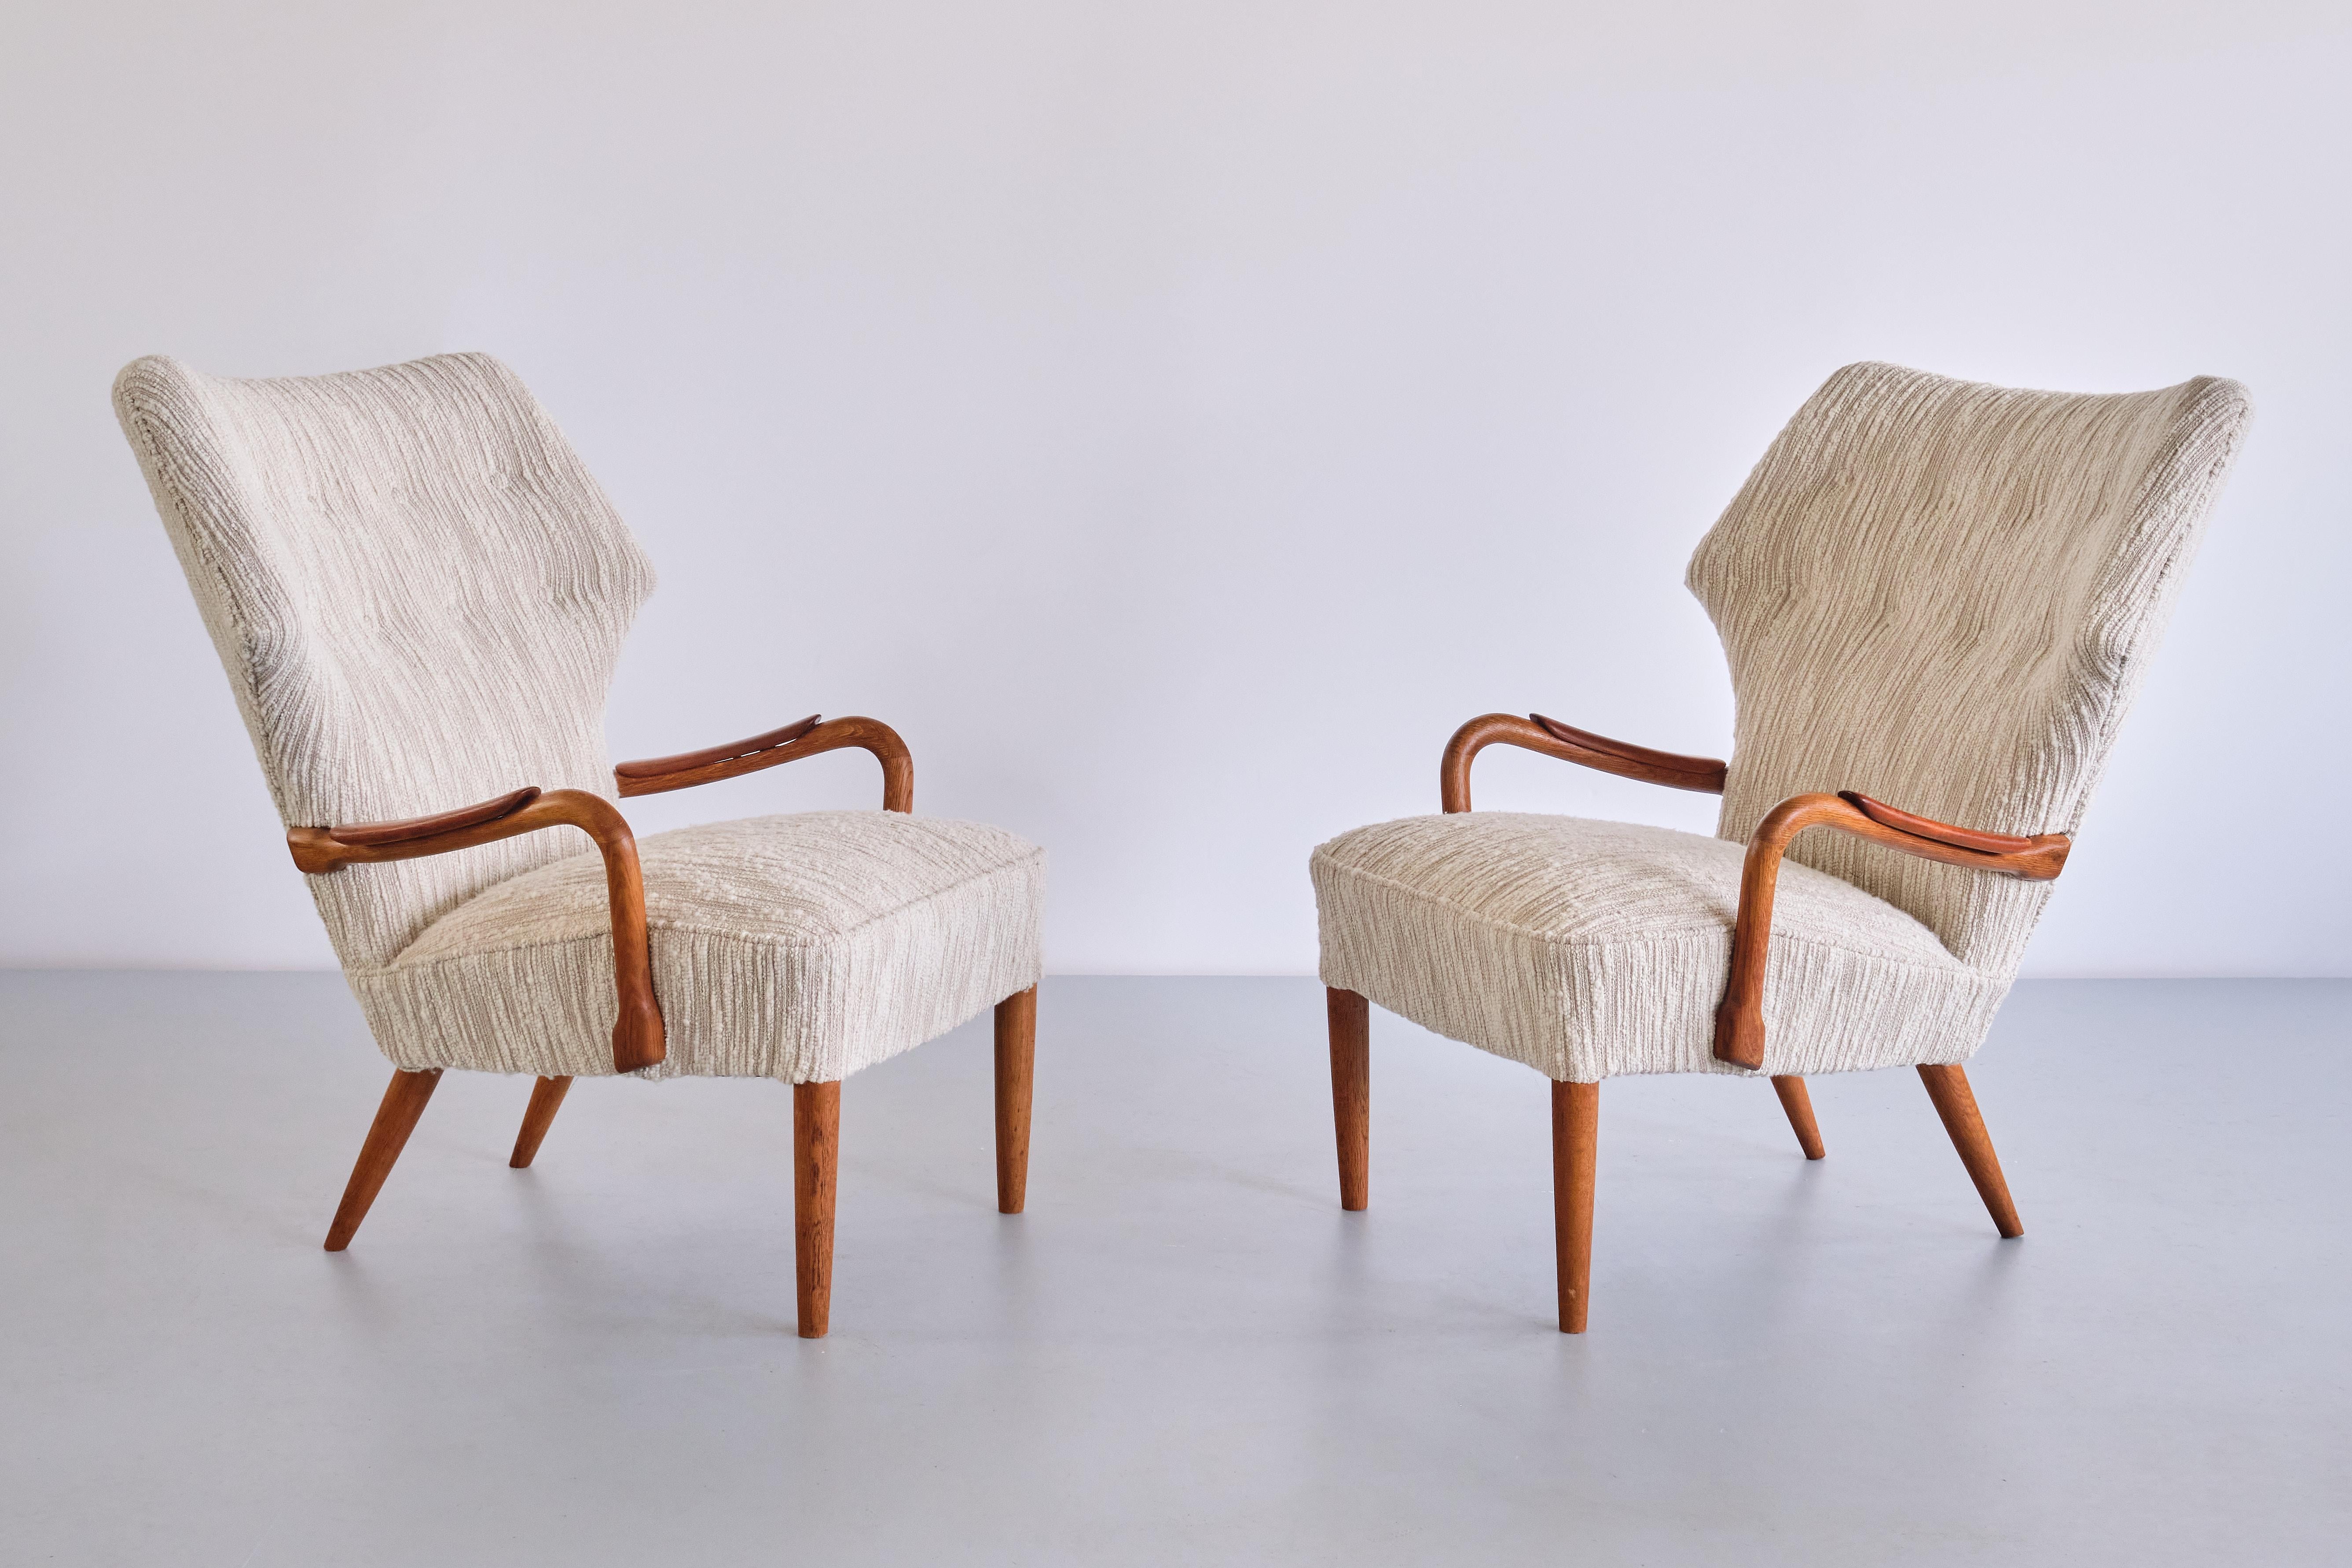 This rare set consisting of two armchairs and a matching stool were produced by a Danish cabinetmaker in Roskilde in the mid 1950s.
The design of the armchairs is marked by the slightly reclined, wing shaped back with buttoned upholstery details.